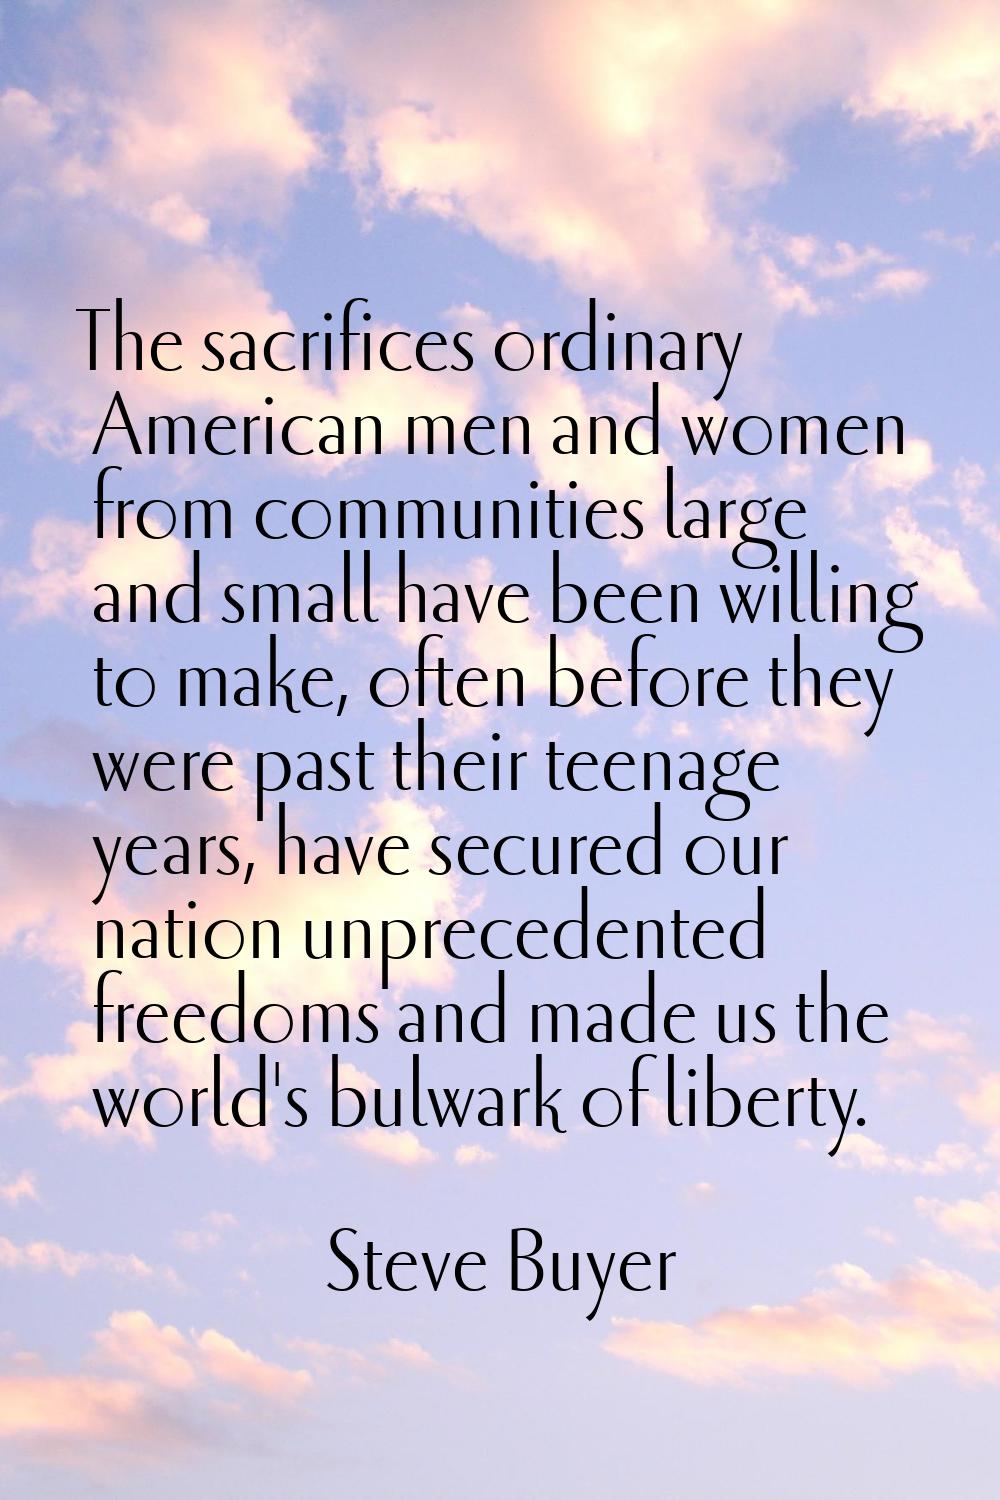 The sacrifices ordinary American men and women from communities large and small have been willing t